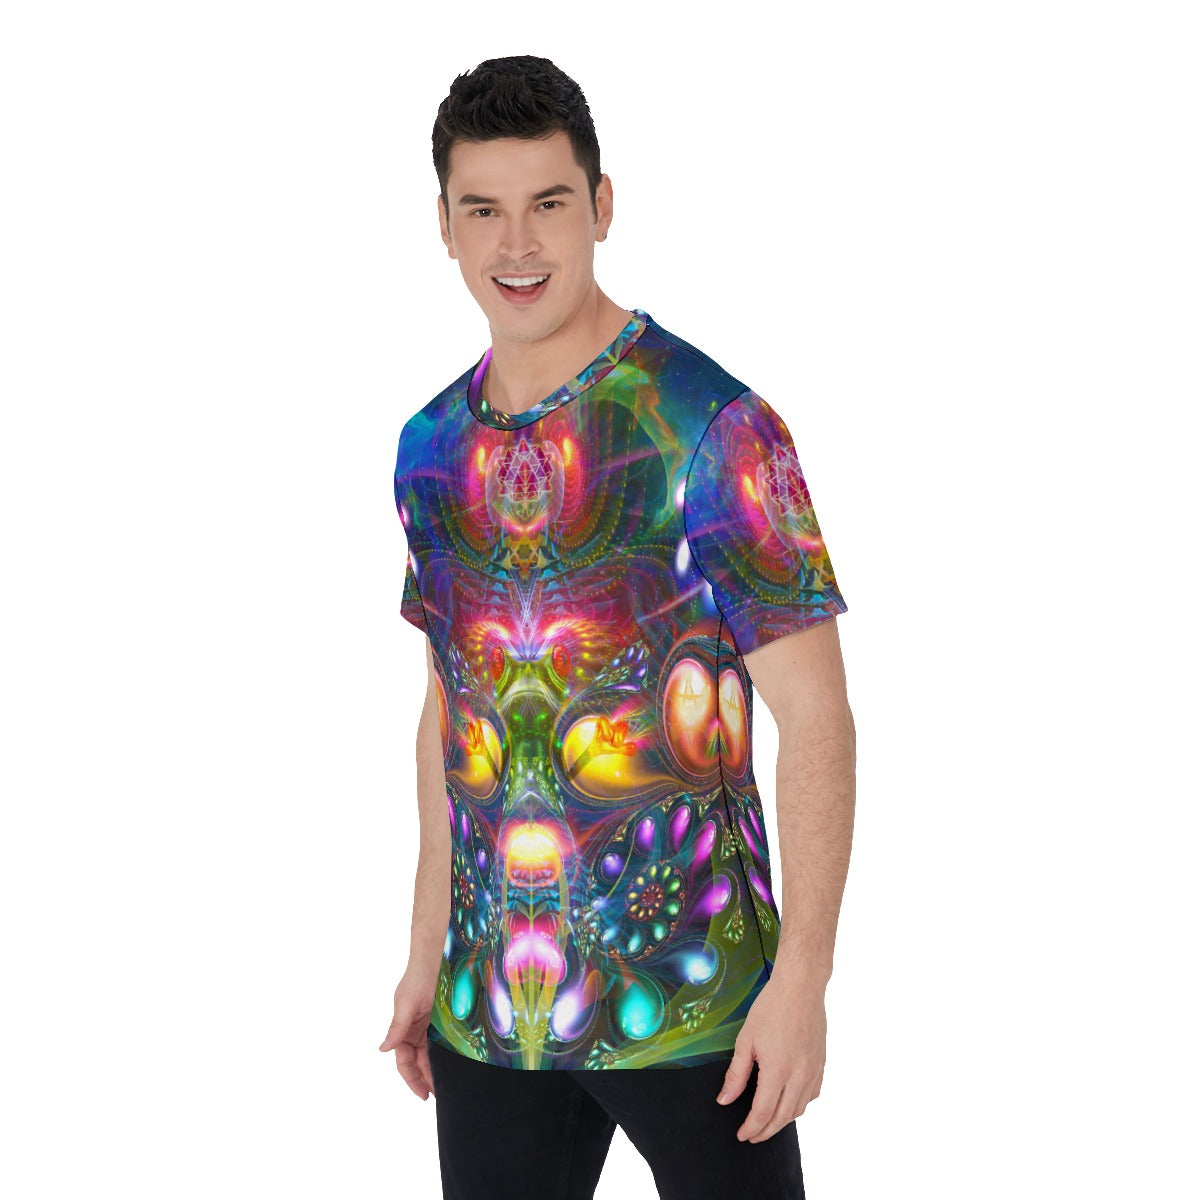 Trippy Psychedelic Festival Outfit